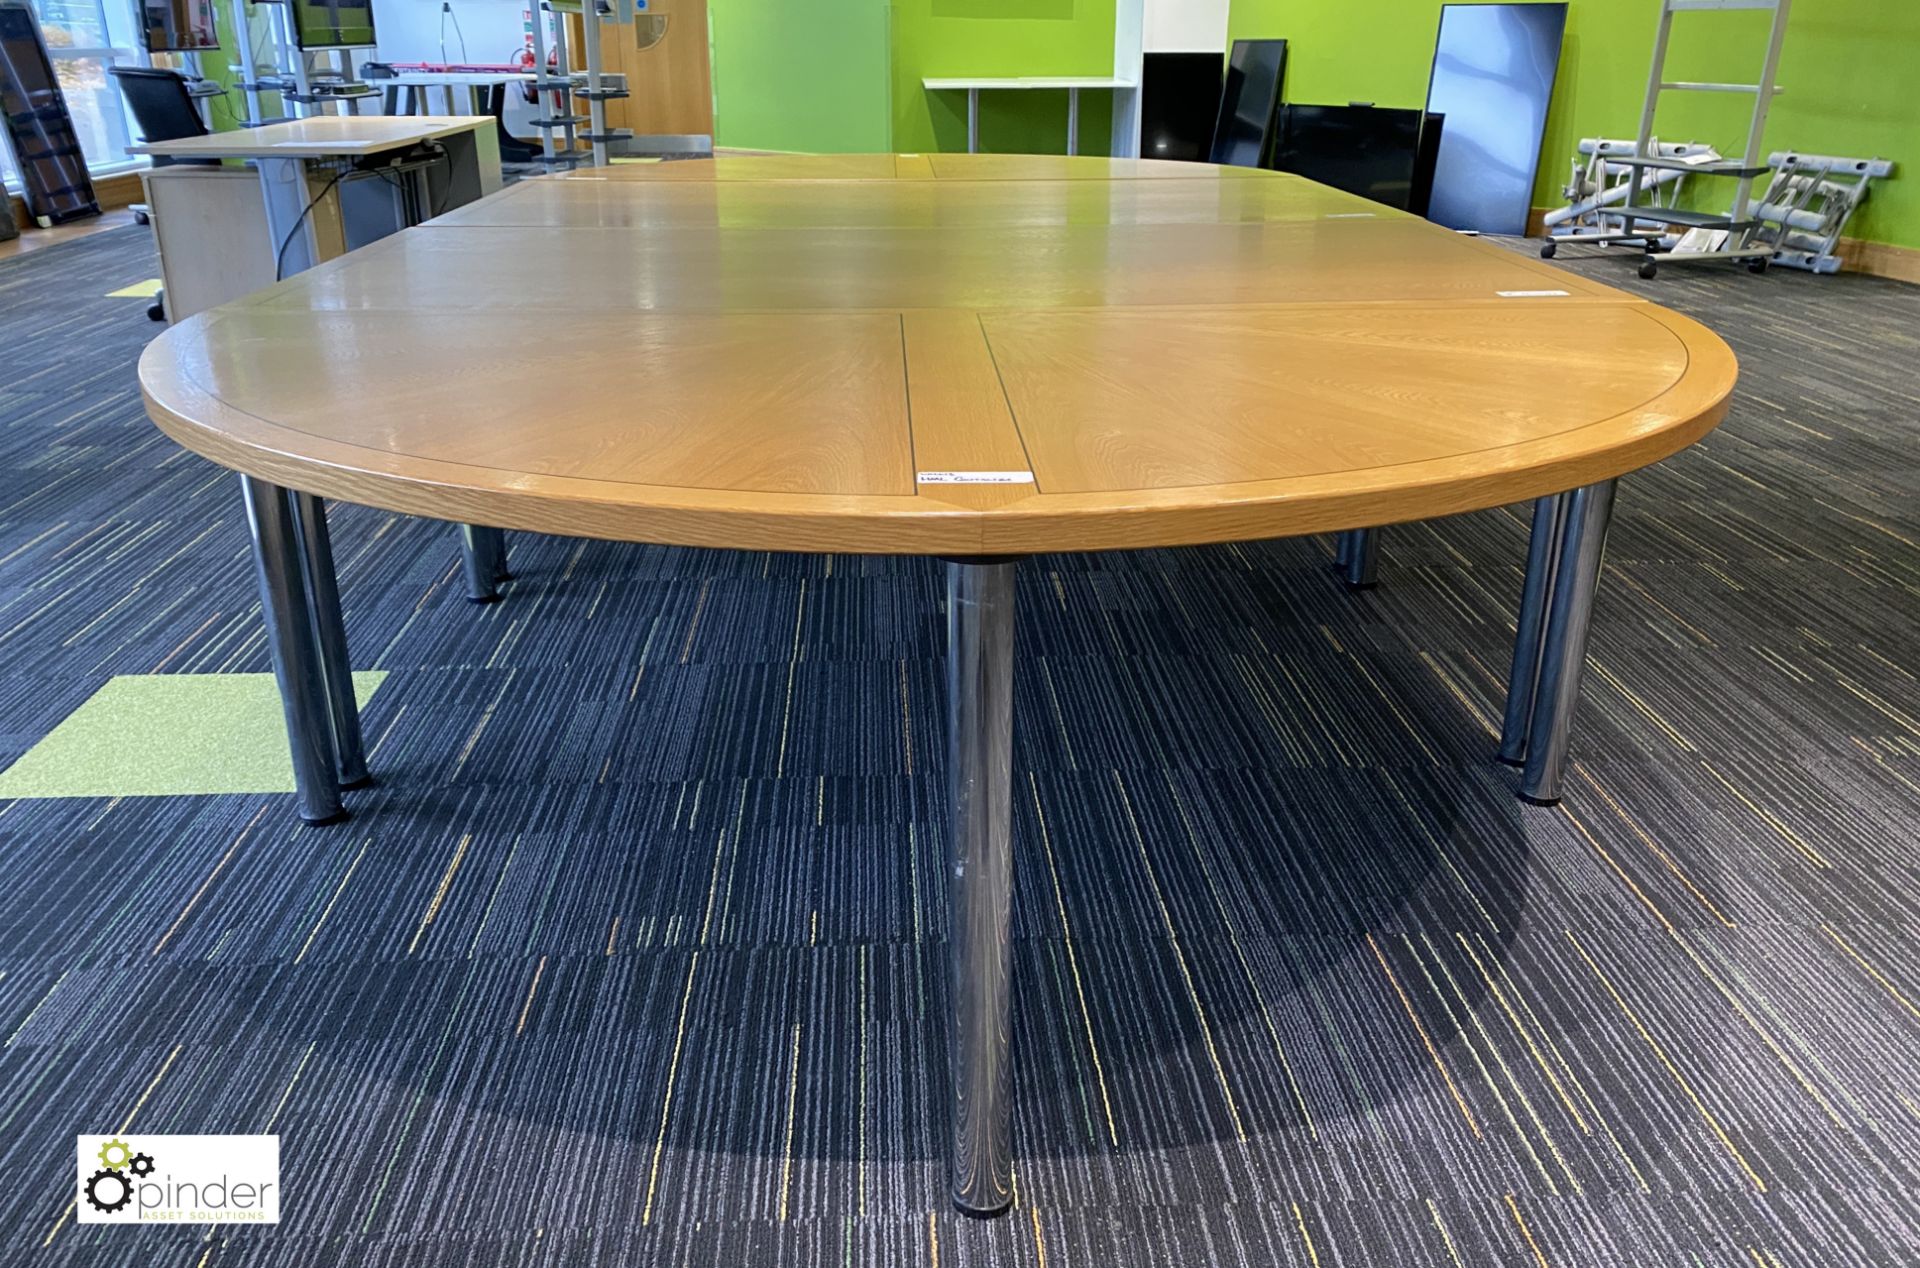 Light oak inlaid 4-section Boardroom Table, total overall dimension 4000mm x 2000mm - Image 8 of 8